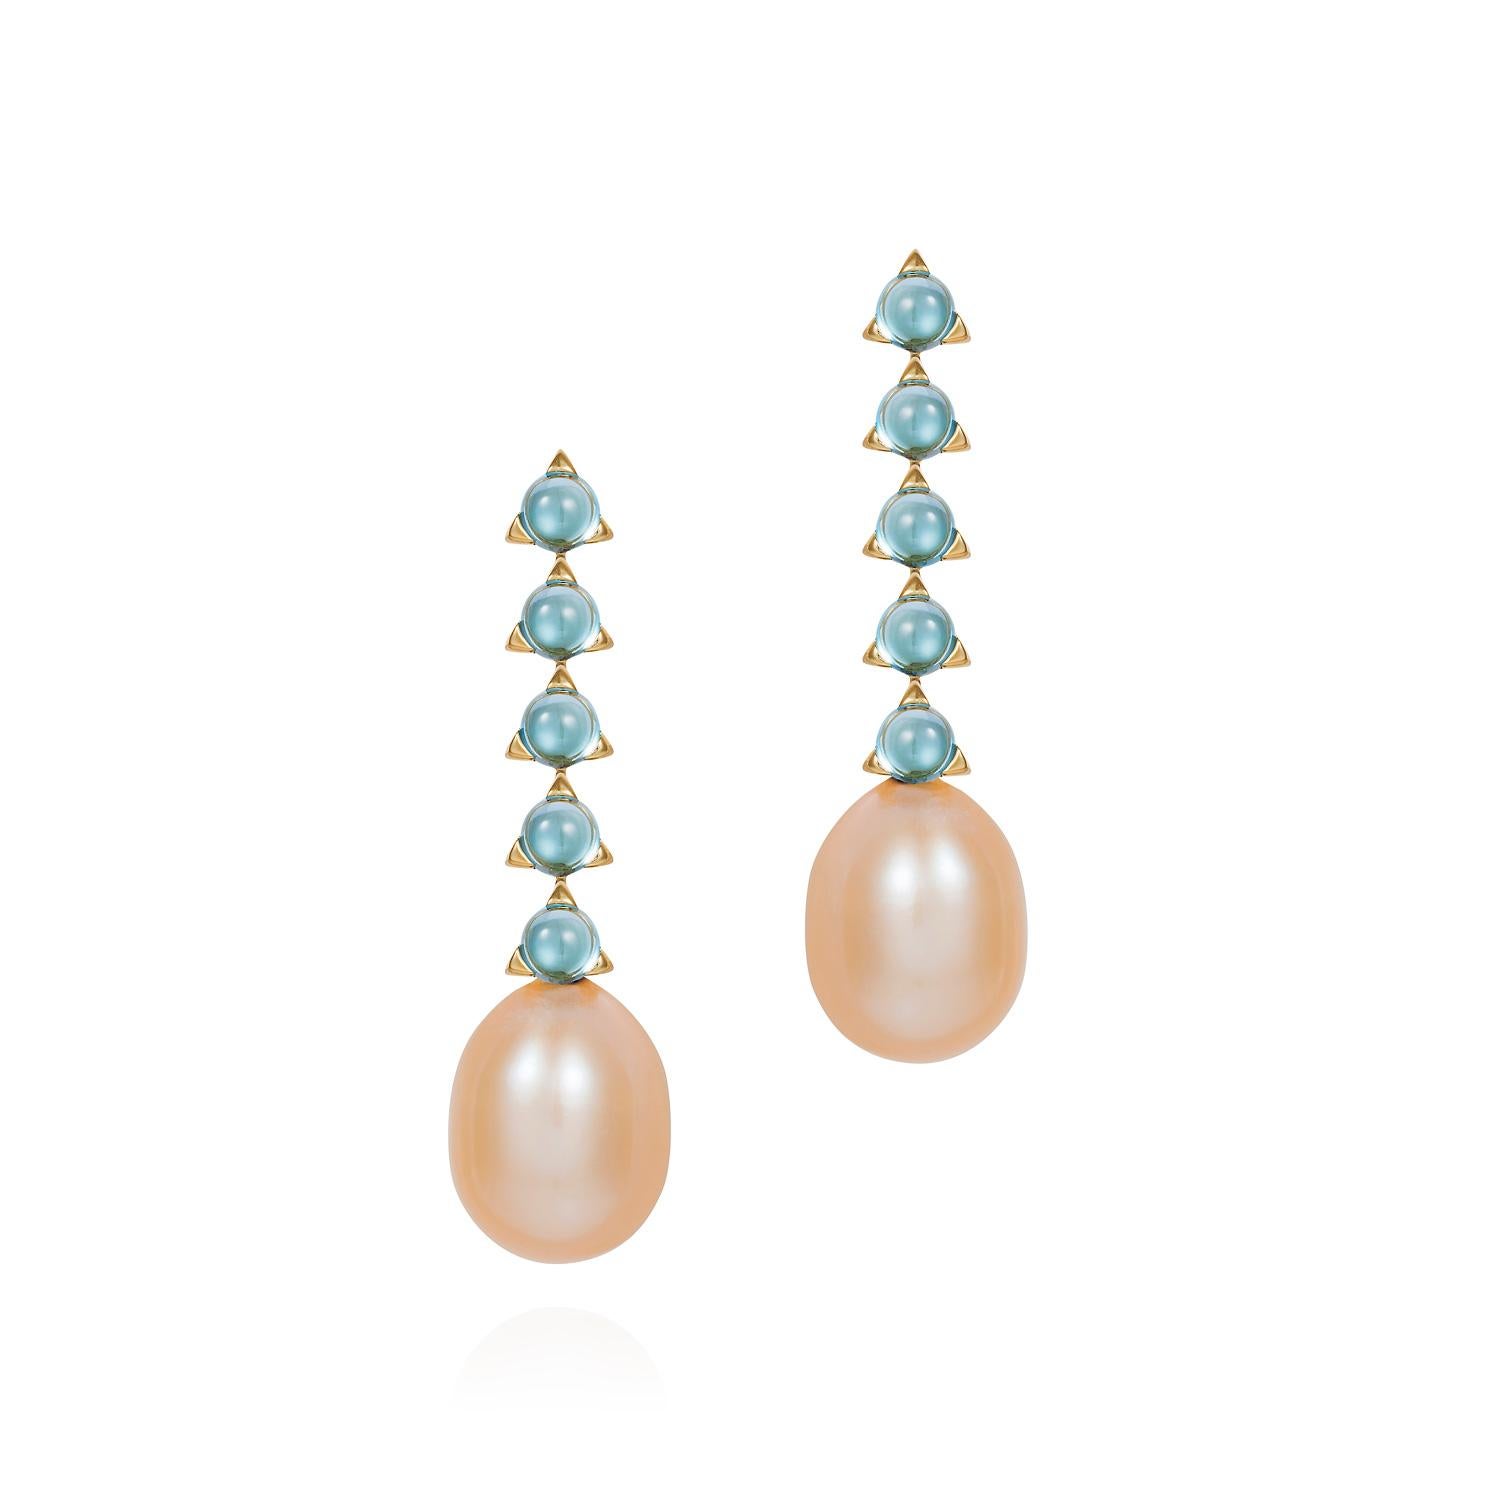 MAVIADA's five stone 3mm round smooth cabochon stones, 8x12mm light peach, light violet coloured baroque pearl 18k yellow gold earrings, come in multiple fabulous colours. Each baroque pearl is unique and the colours may vary between light peach and